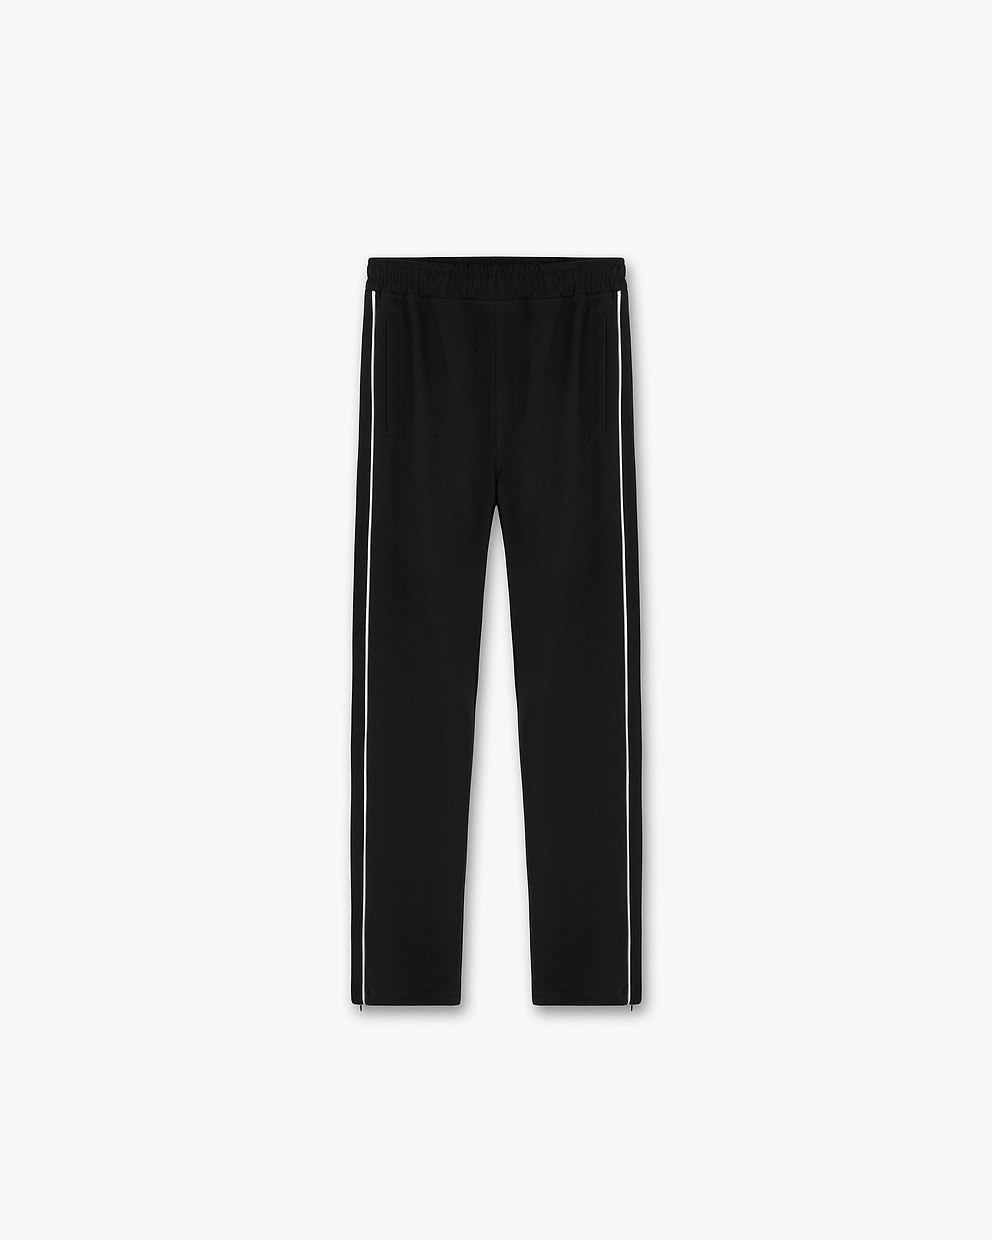 Represent Clo - The Split Pant - A mid weight textured